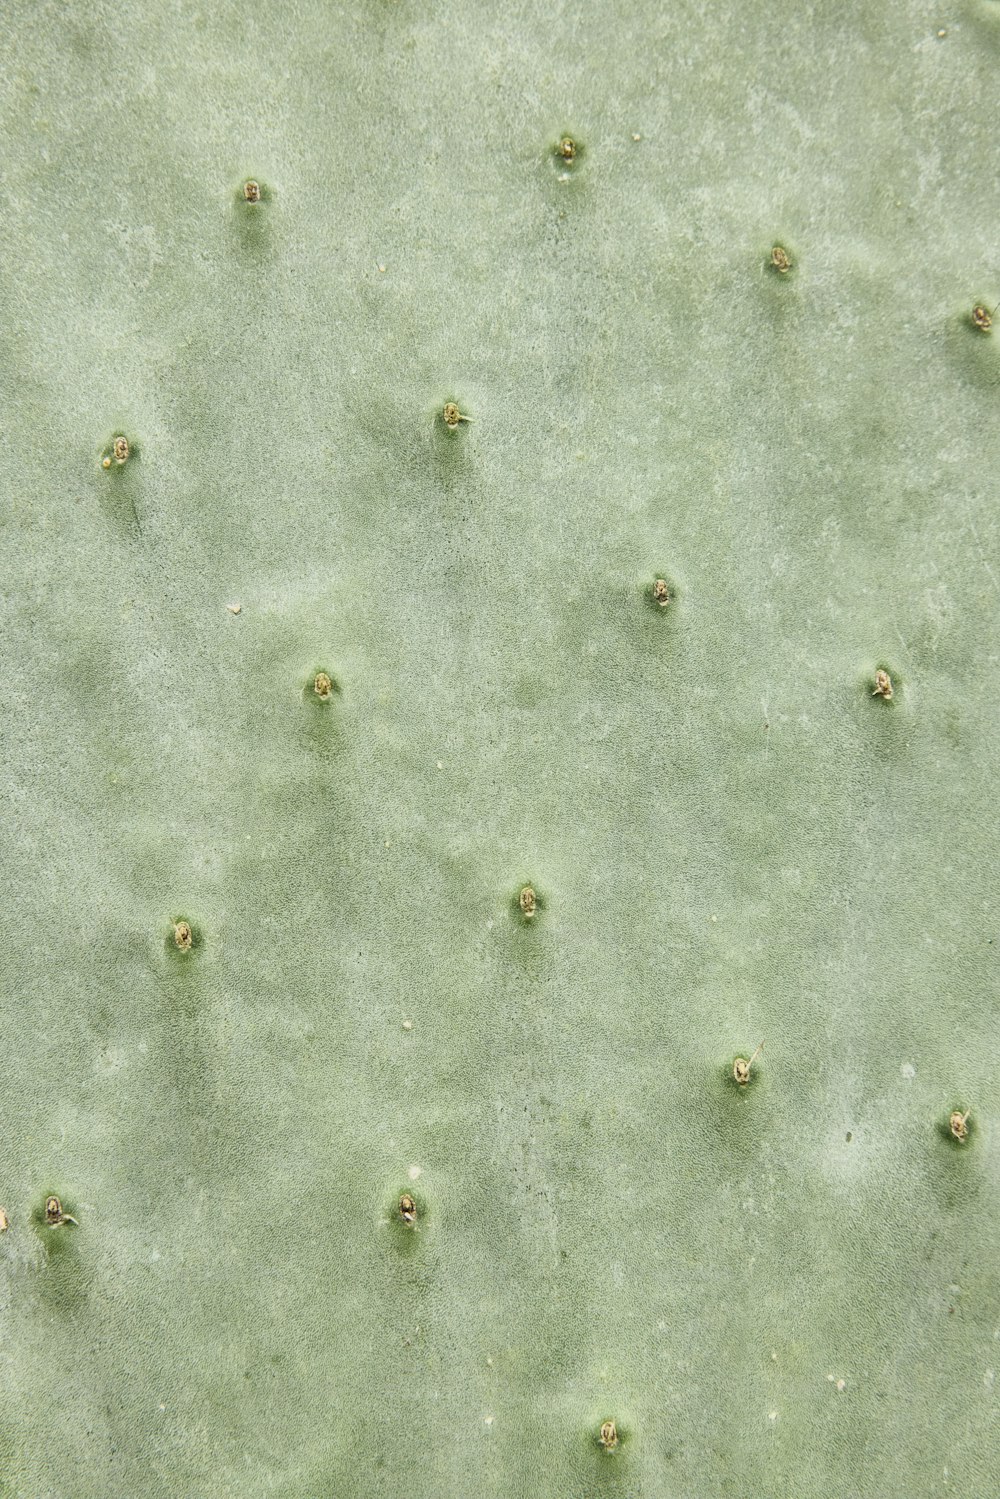 a close up of a green plant with tiny flowers